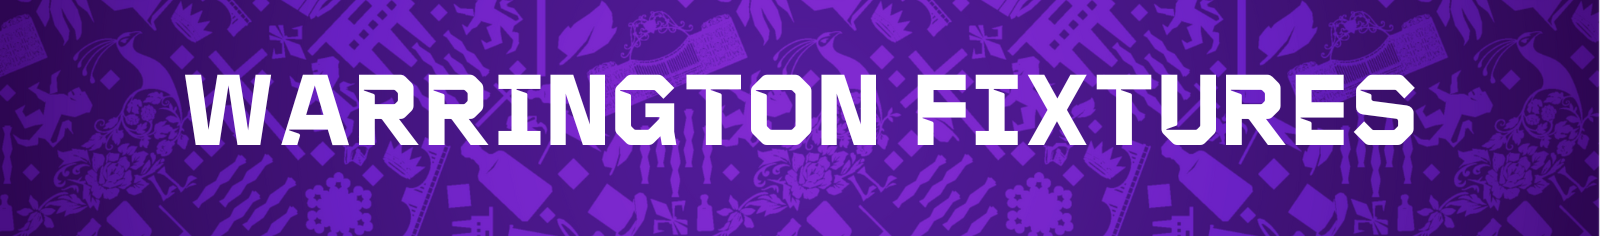 Purple graphic with illustrations of Warrington in the background. Text: Warrington fixtures